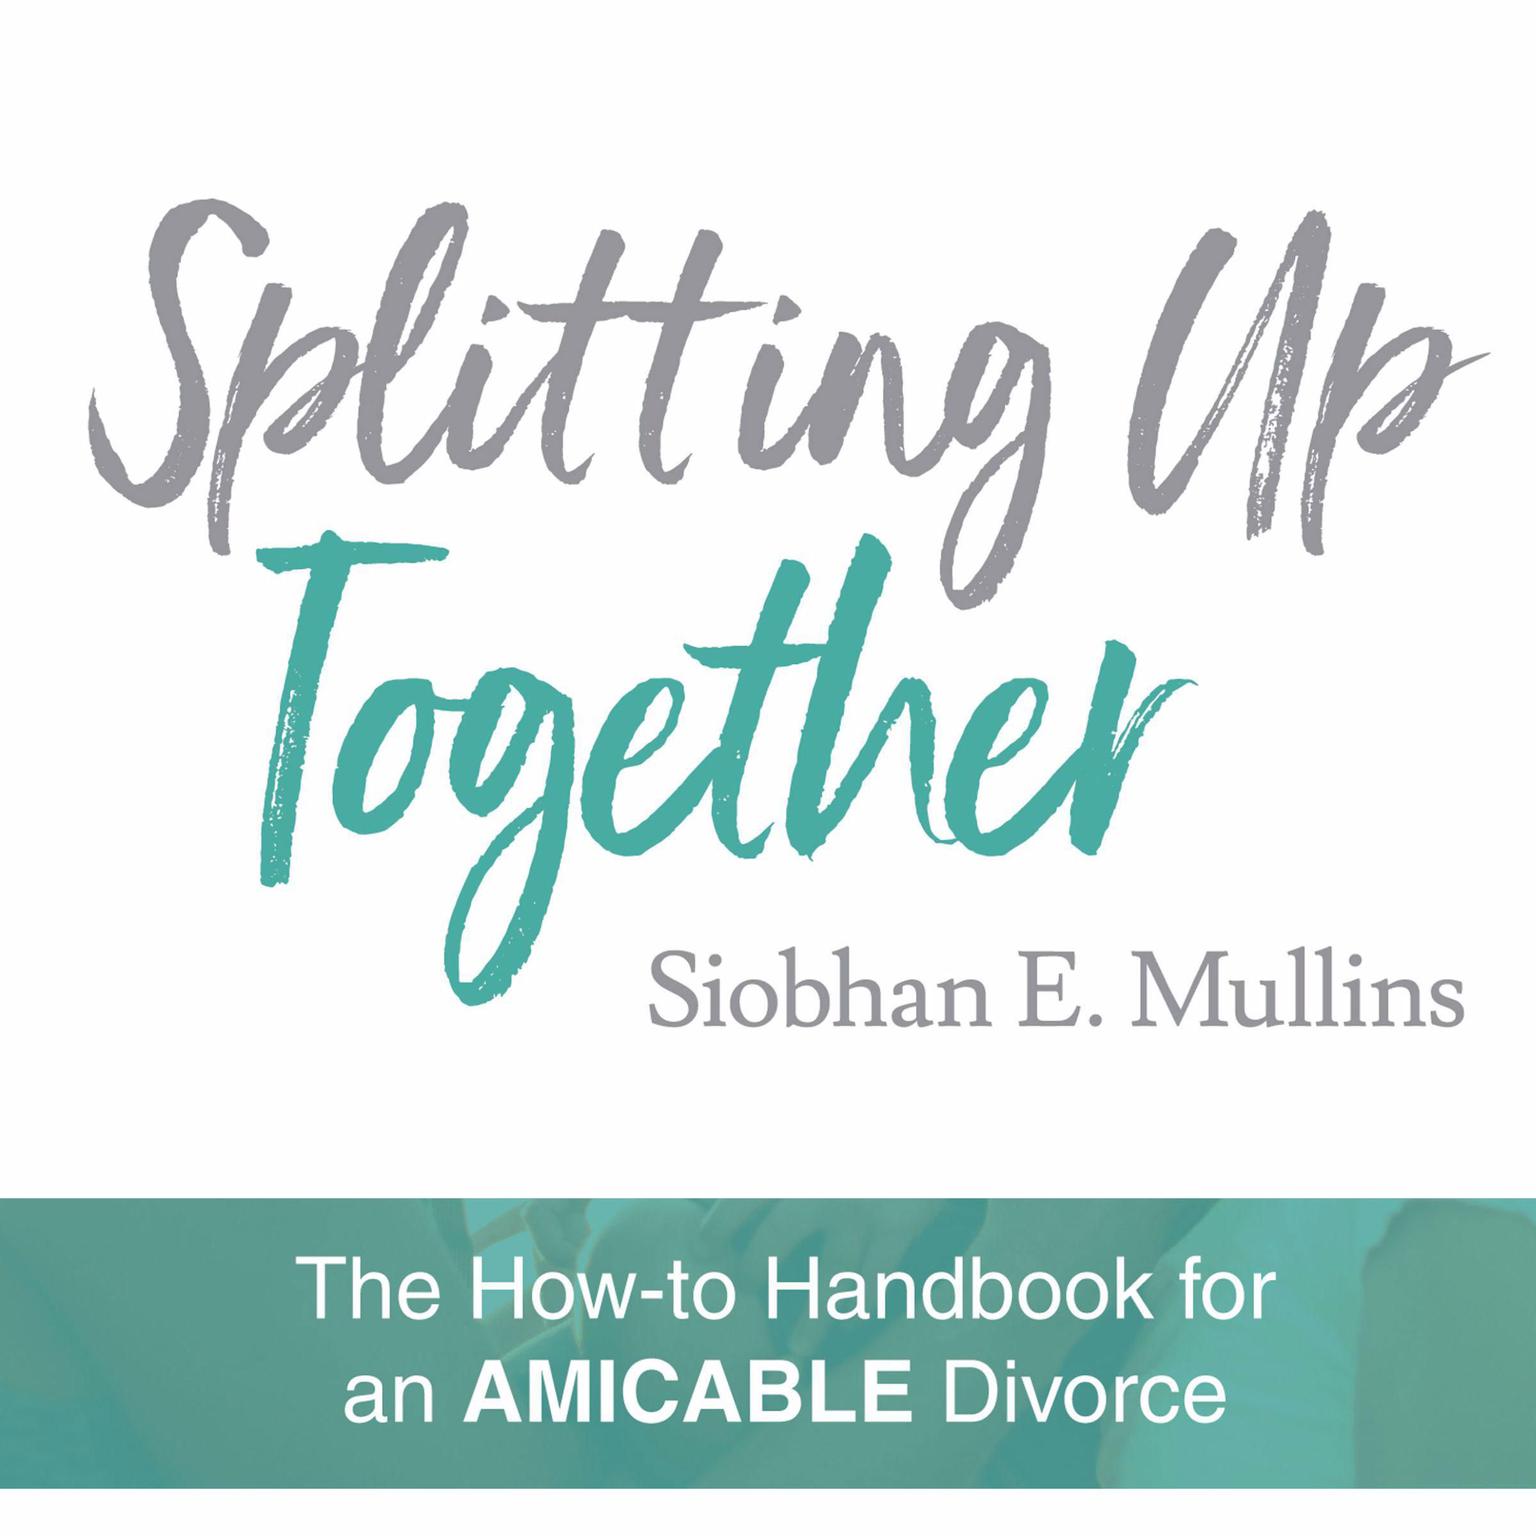 Splitting Up Together (Abridged) Audiobook, by Siobhan E Mullins